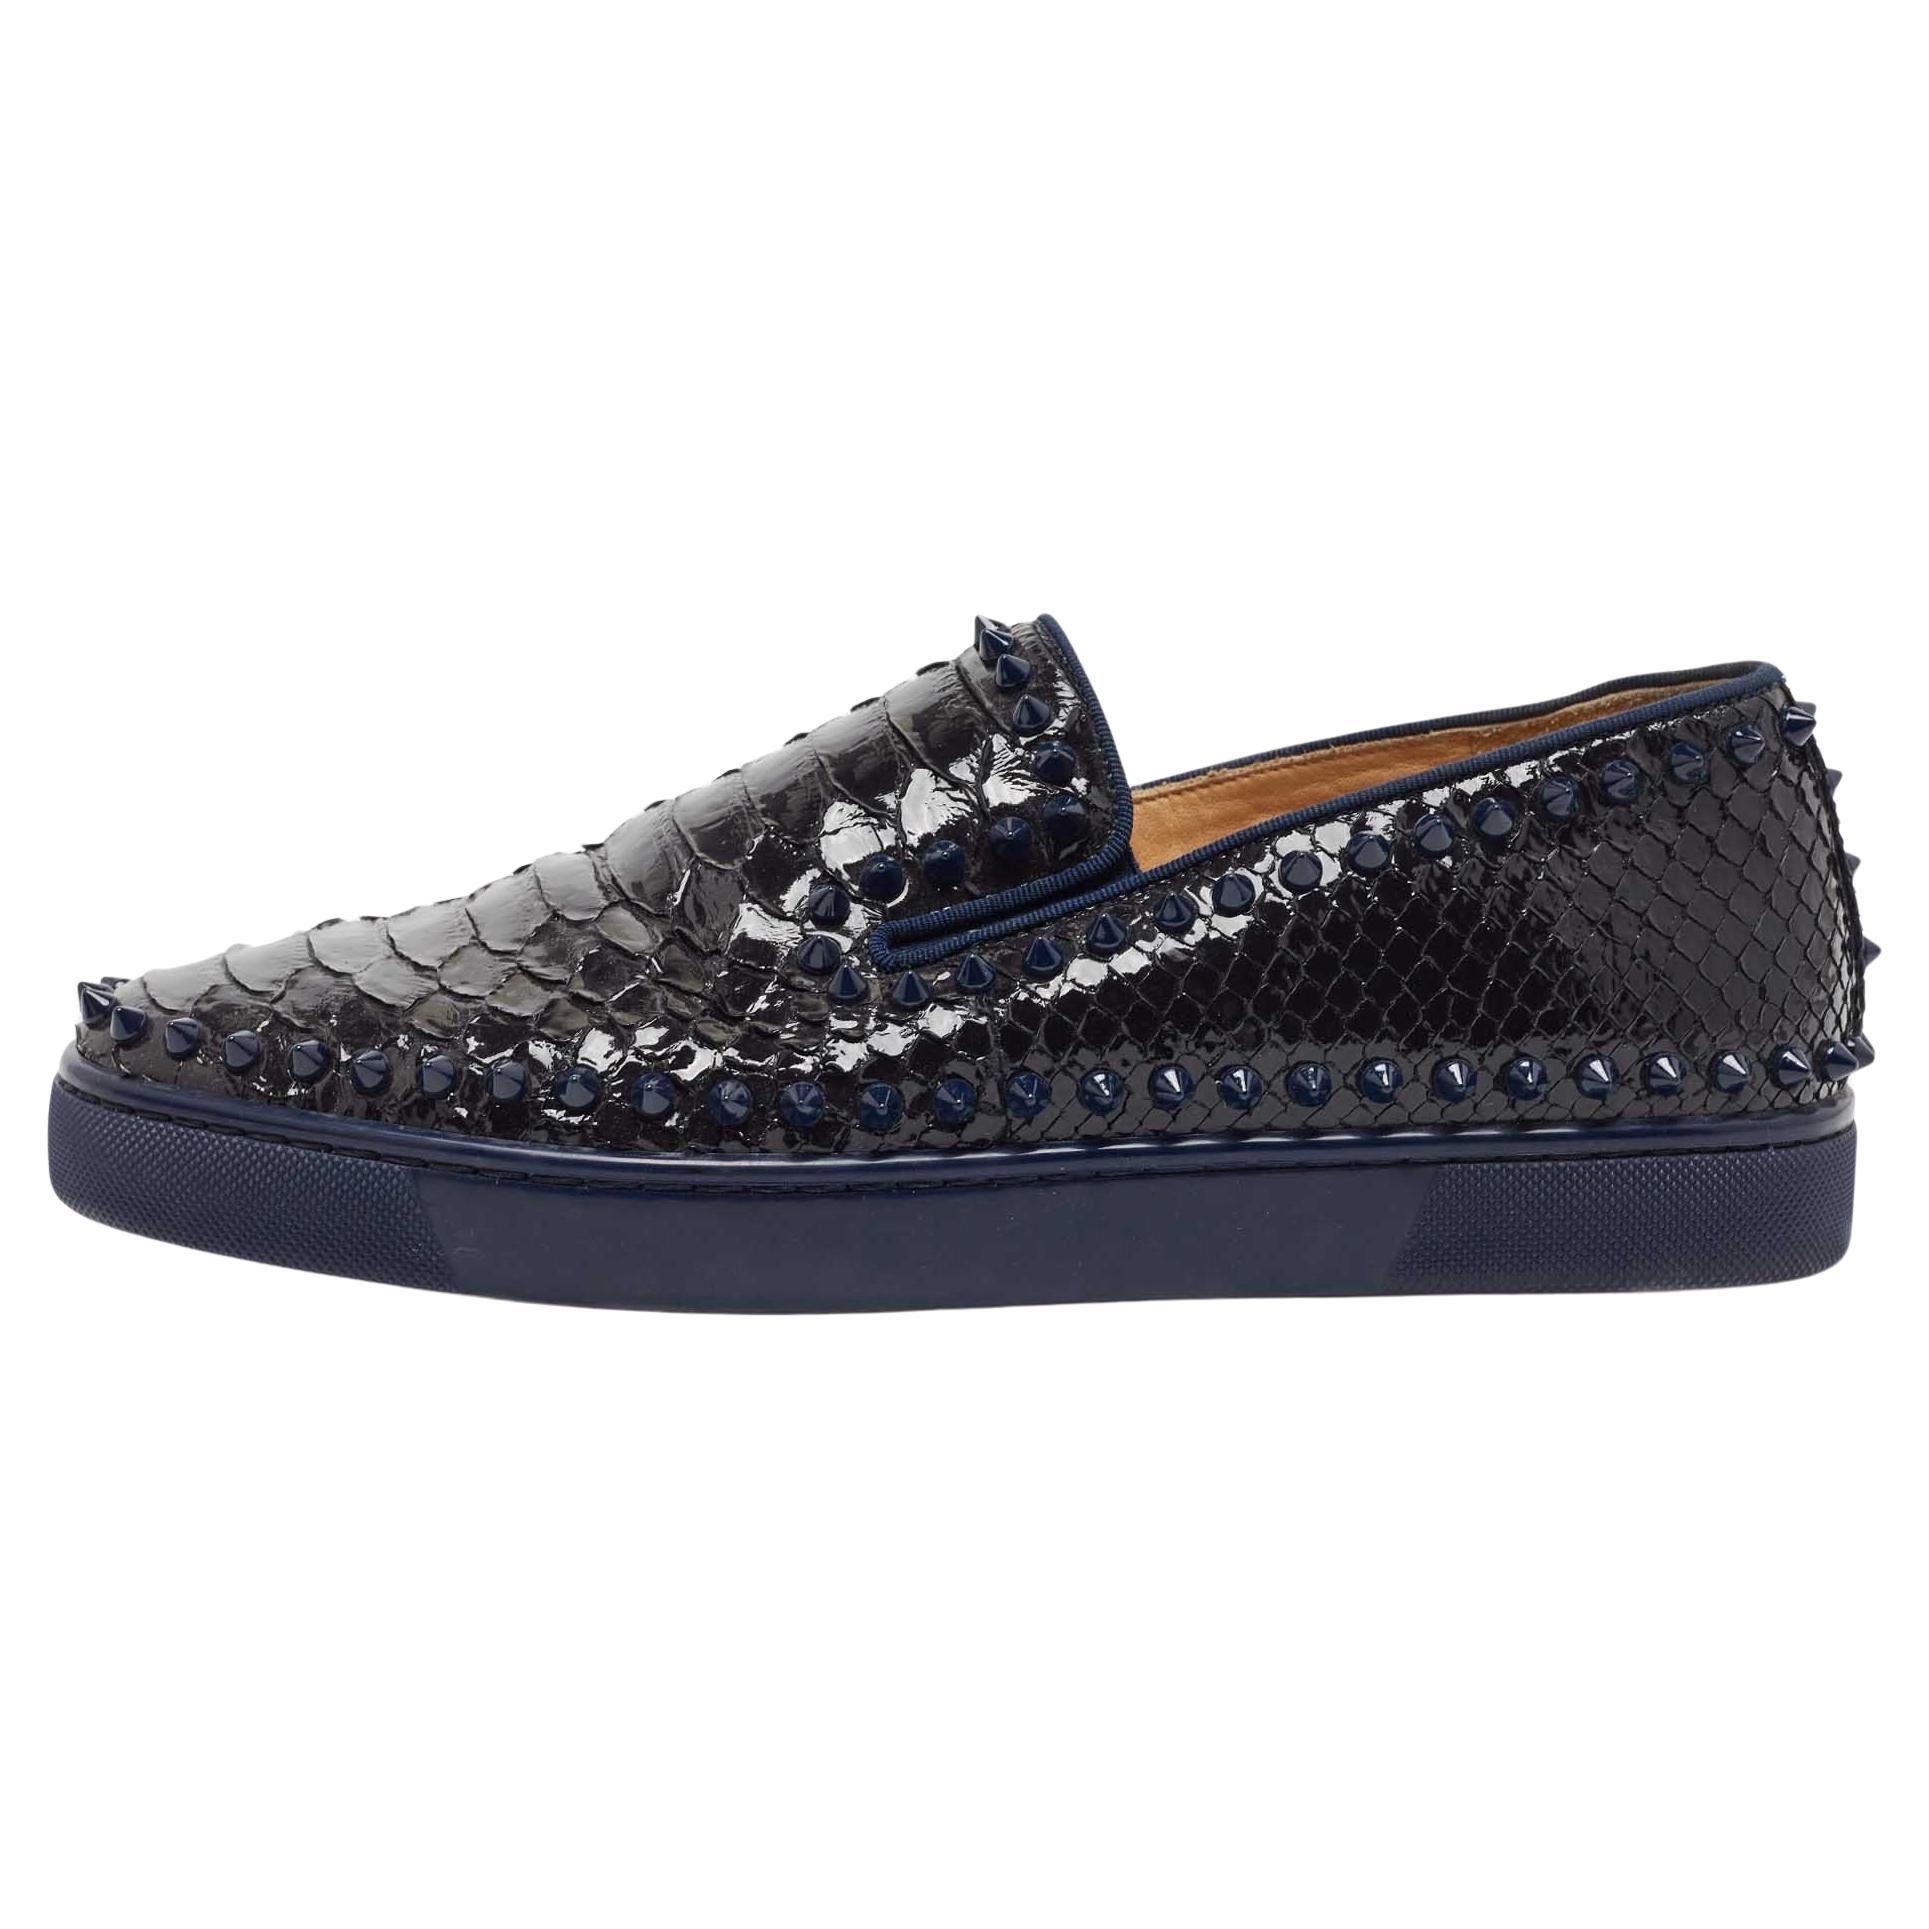 Christian Louboutin Black/Navy Blue Python Spike Pik Boat Sneakers Size 41.5 For Sale